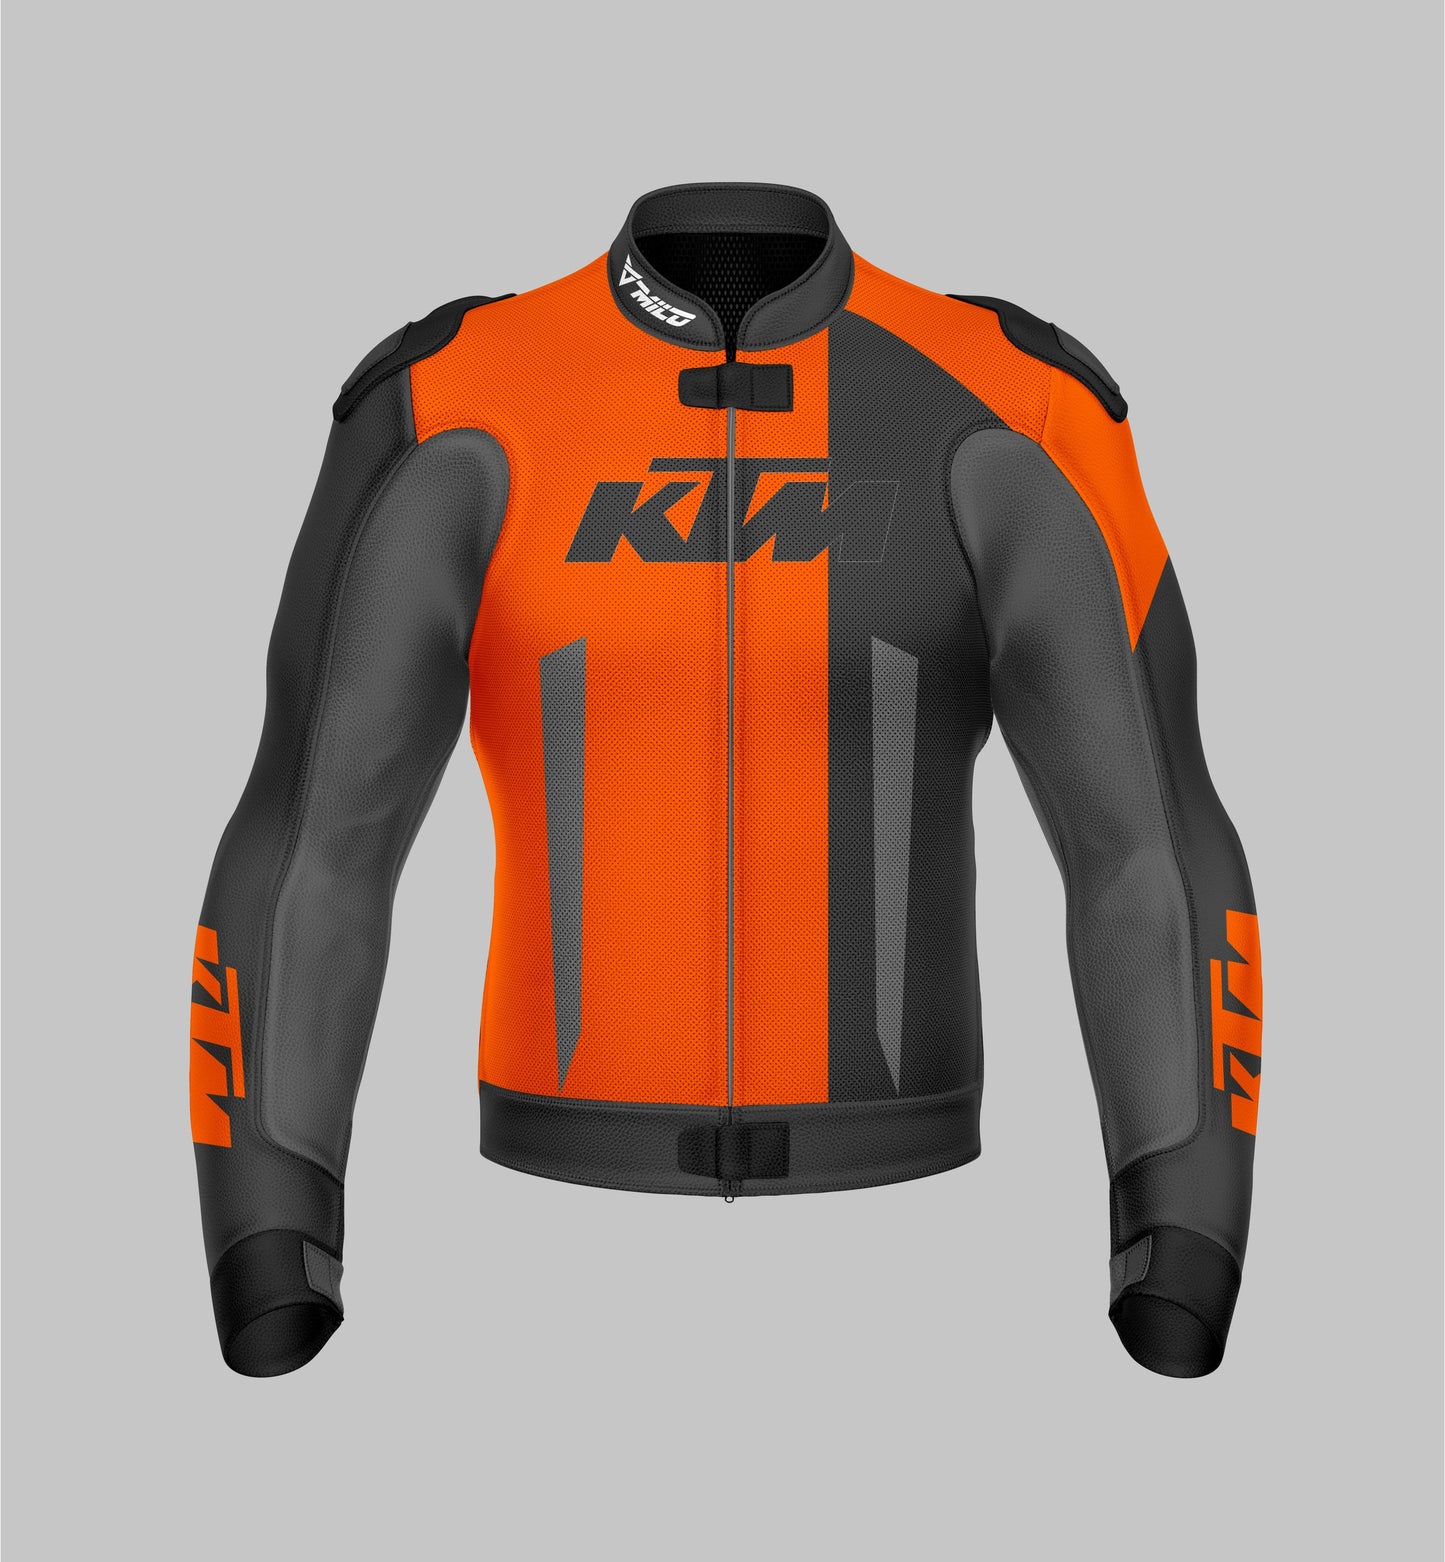 KTM Racing Motorcycle Leather Protective Jacket - Unisex - Custom Design - All Sizes Are Available